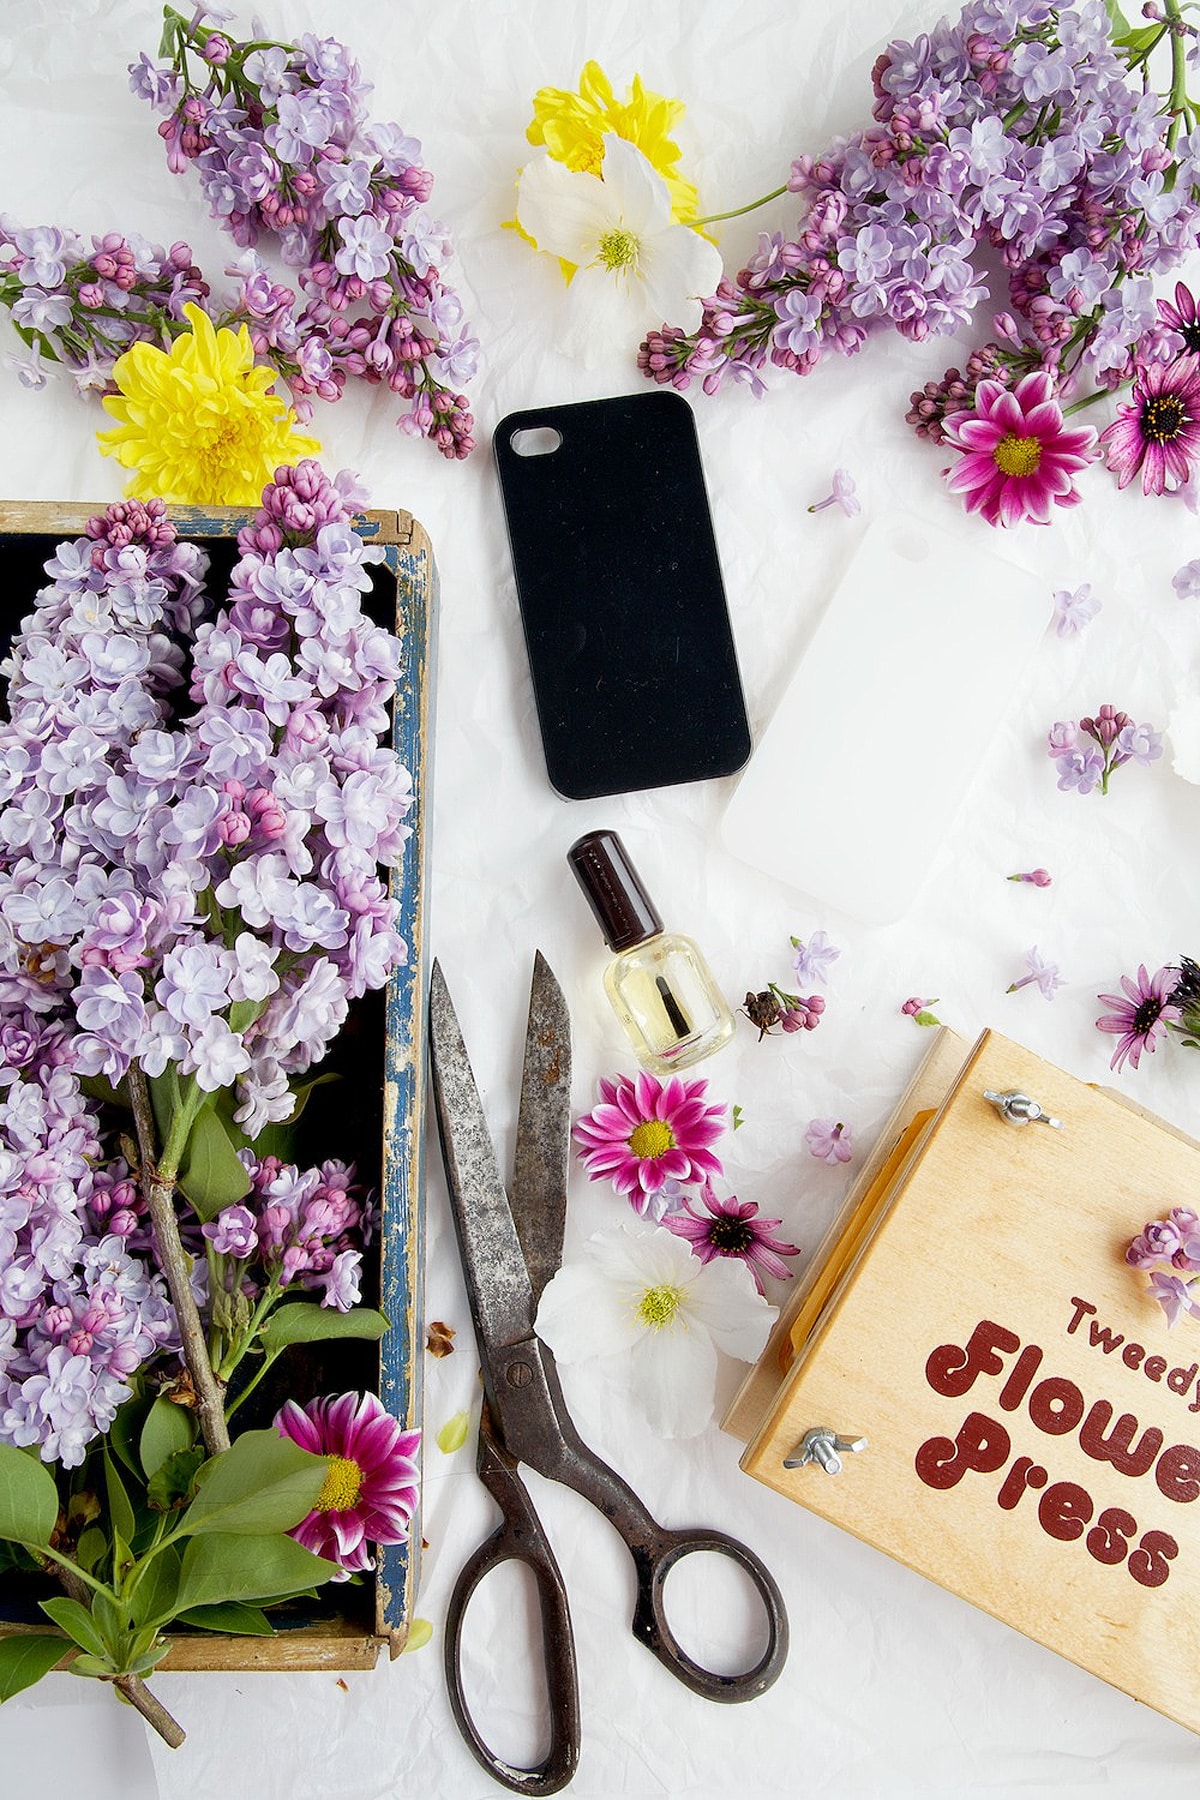 phone case surrounded by flowers